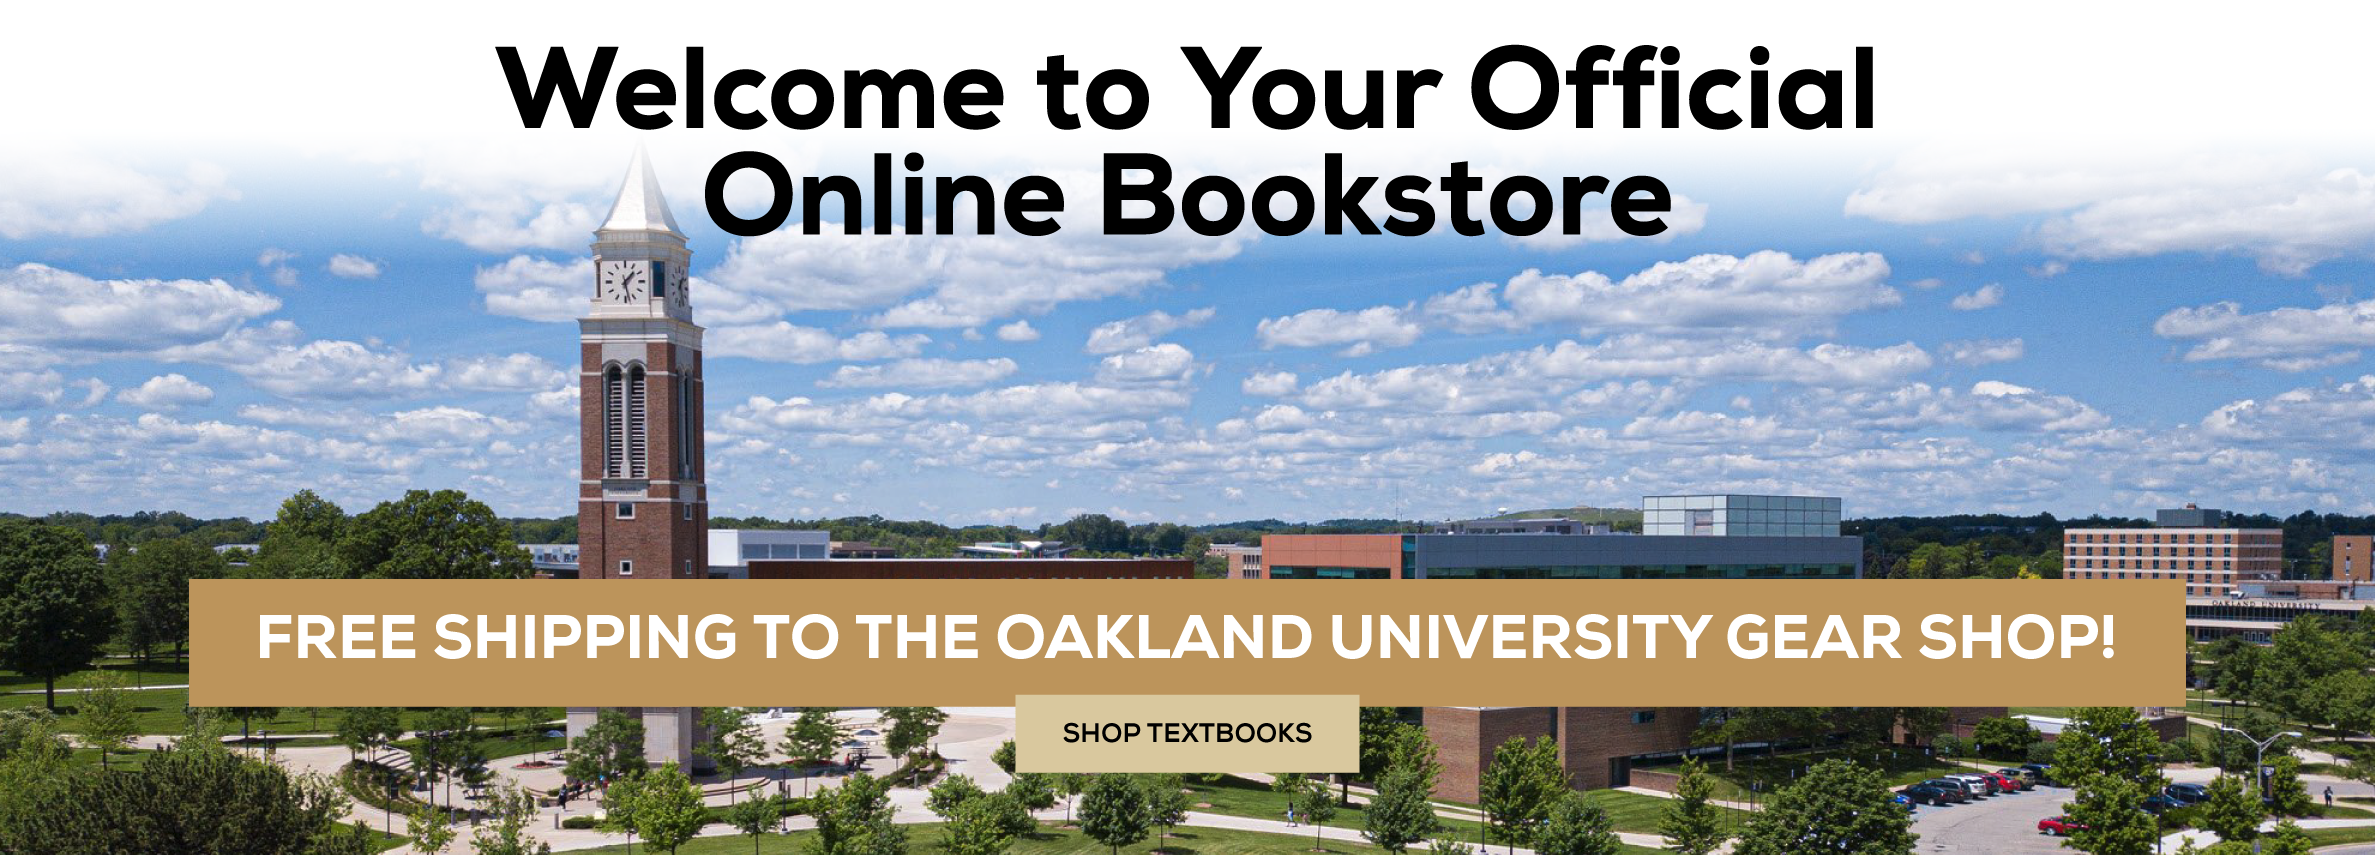 Welcome to Your Official Online Bookstore. Free Shipping to the Oakland University Gear Shop. Shop Textbooks.